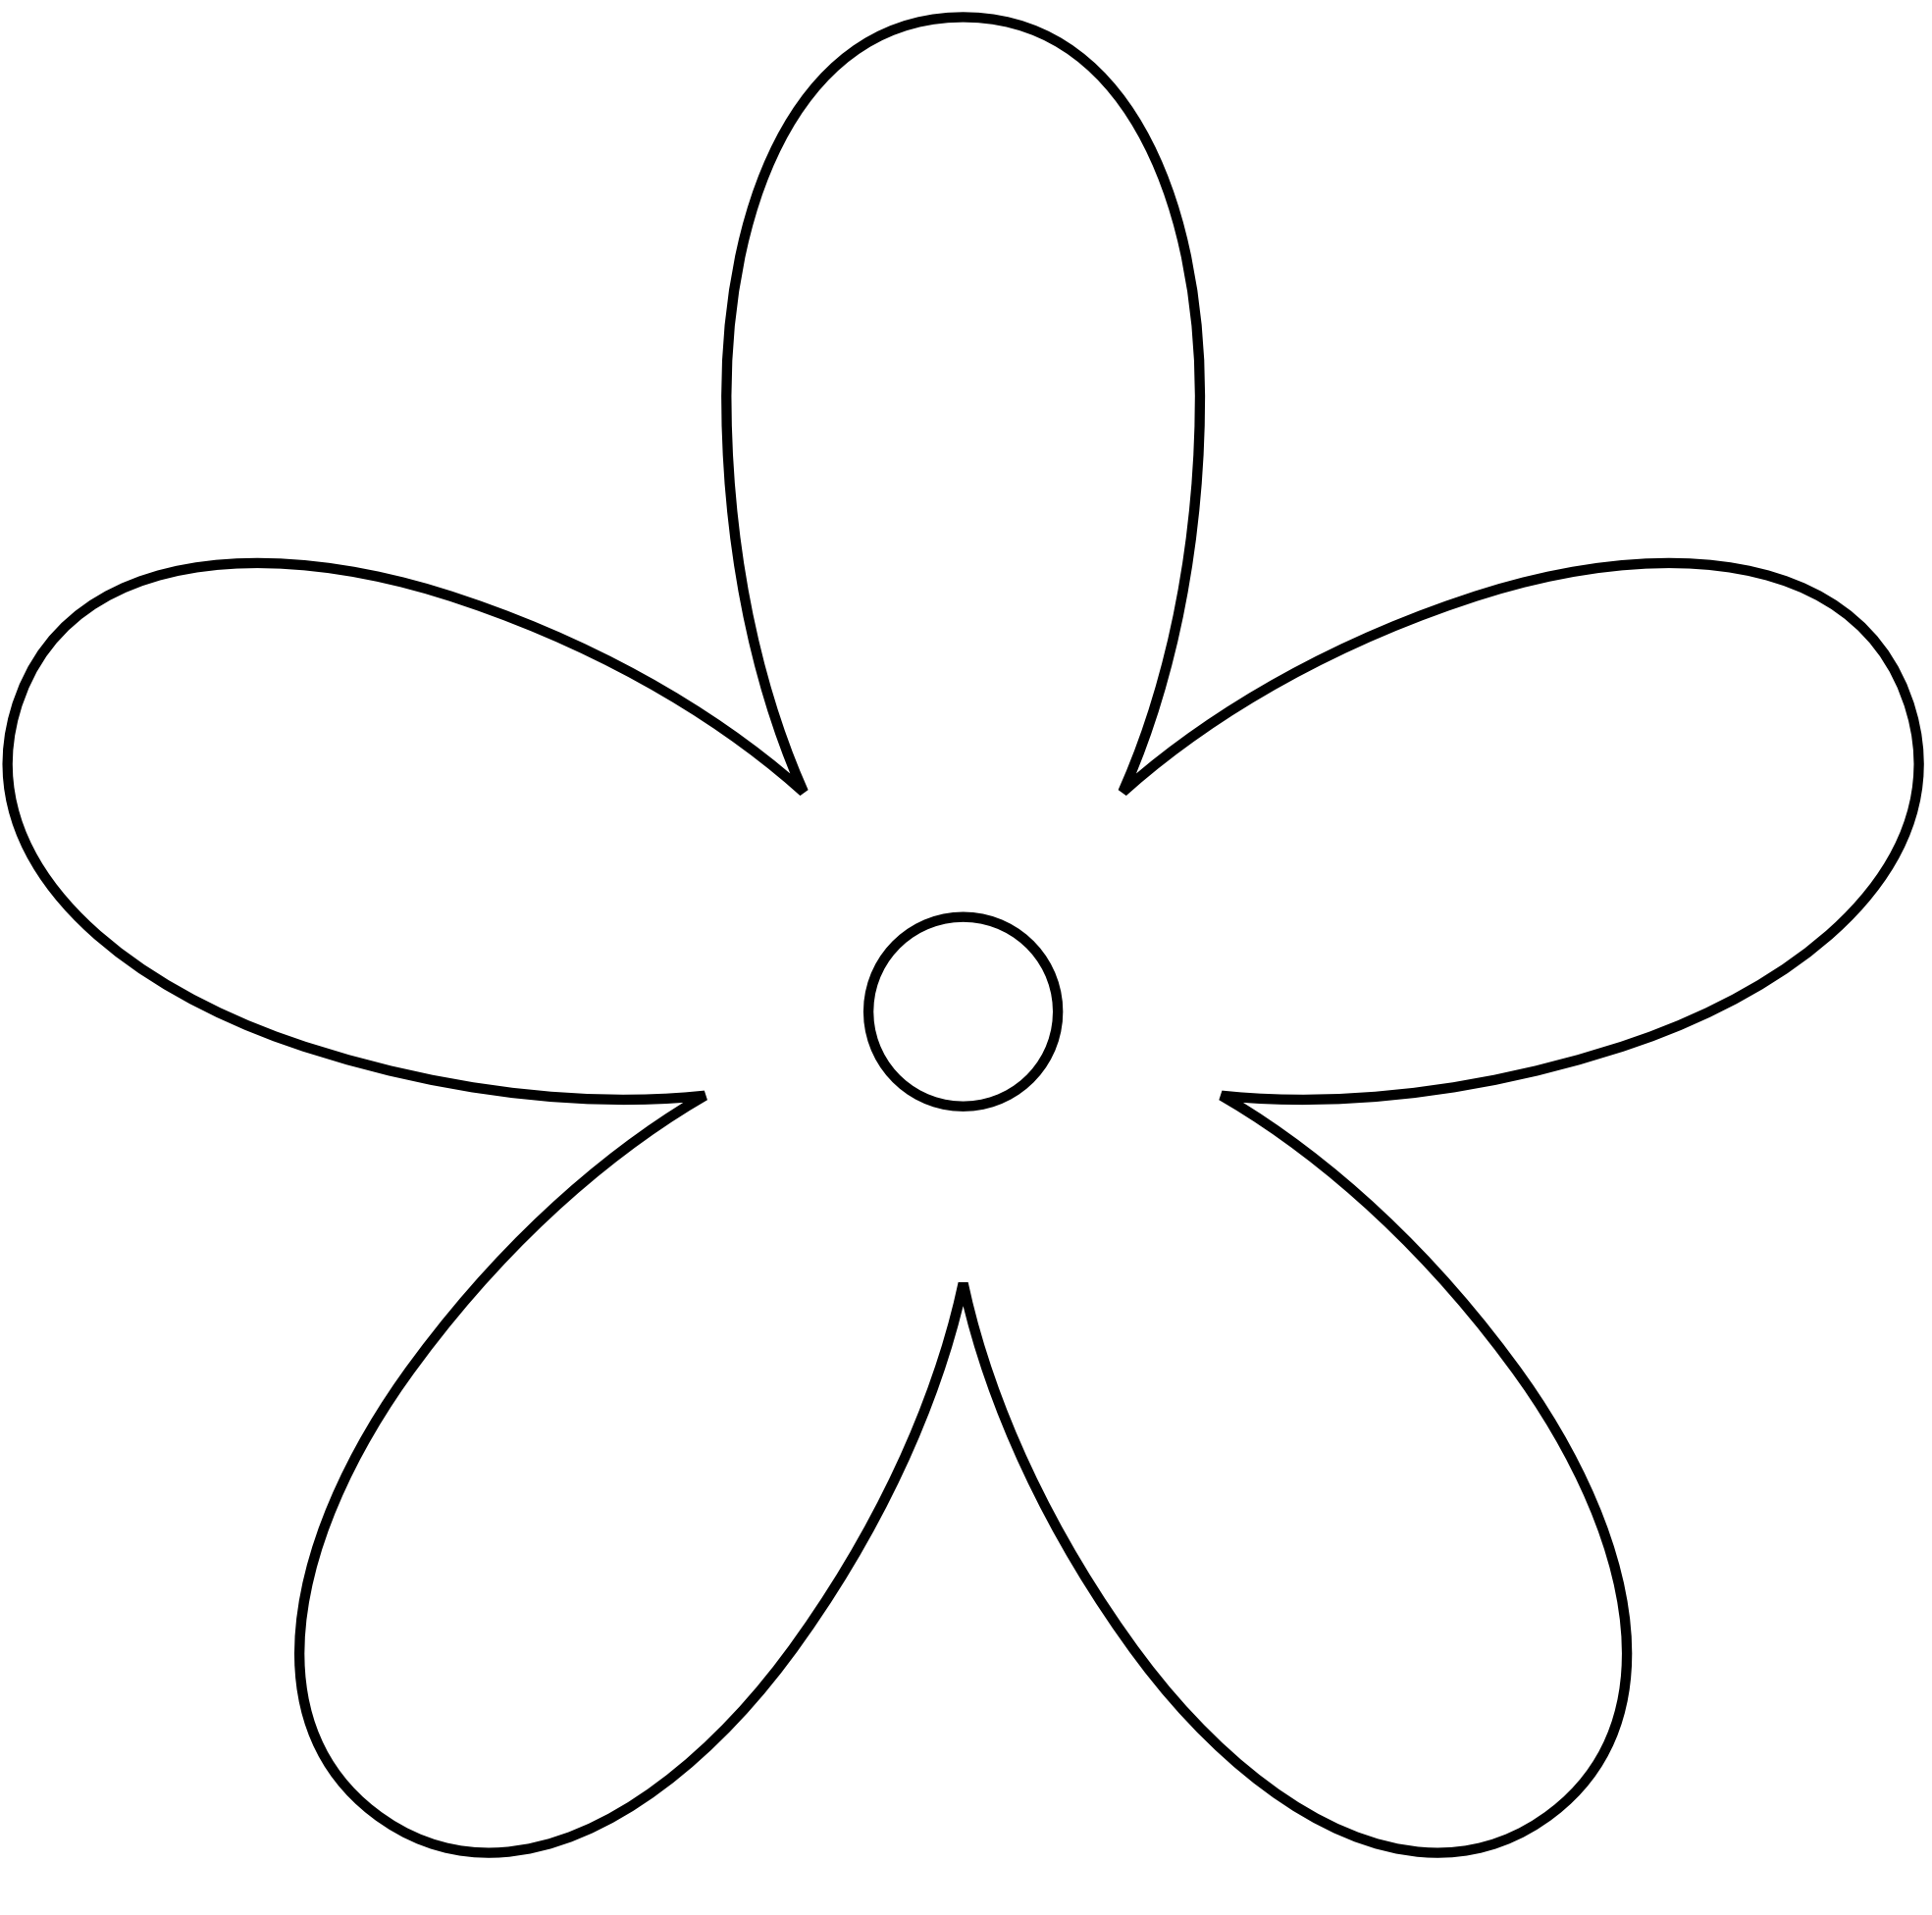 Black And White Flower Clip Art Cliparts.co